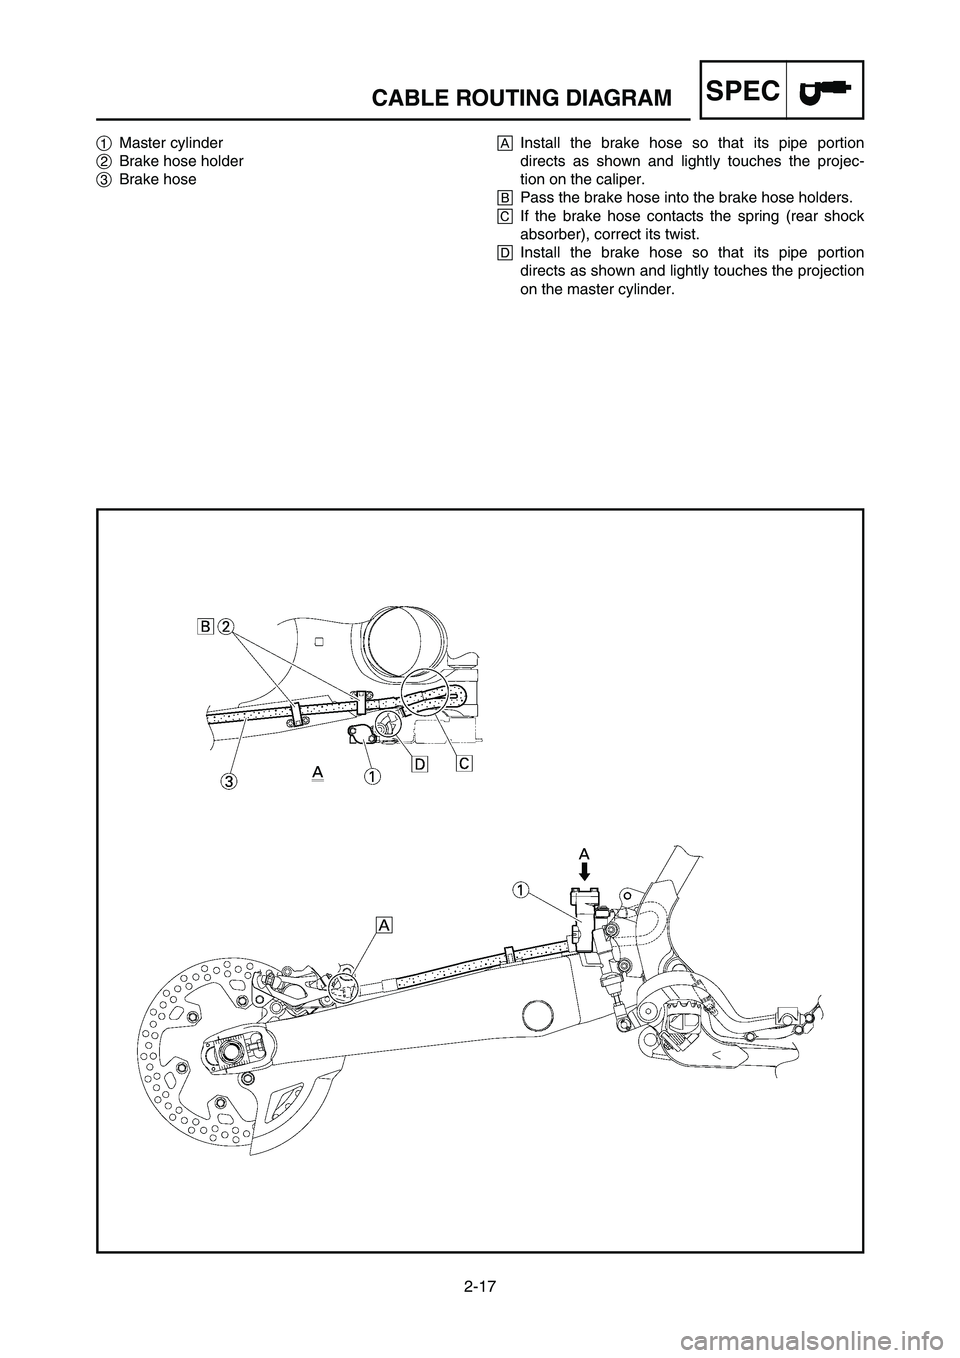 YAMAHA YZ250LC 2007  Manuale duso (in Italian) 2-17
CABLE ROUTING DIAGRAMSPEC
1Master cylinder
2Brake hose holder
3Brake hoseAInstall the brake hose so that its pipe portion
directs as shown and lightly touches the projec-
tion on the caliper.
BPa